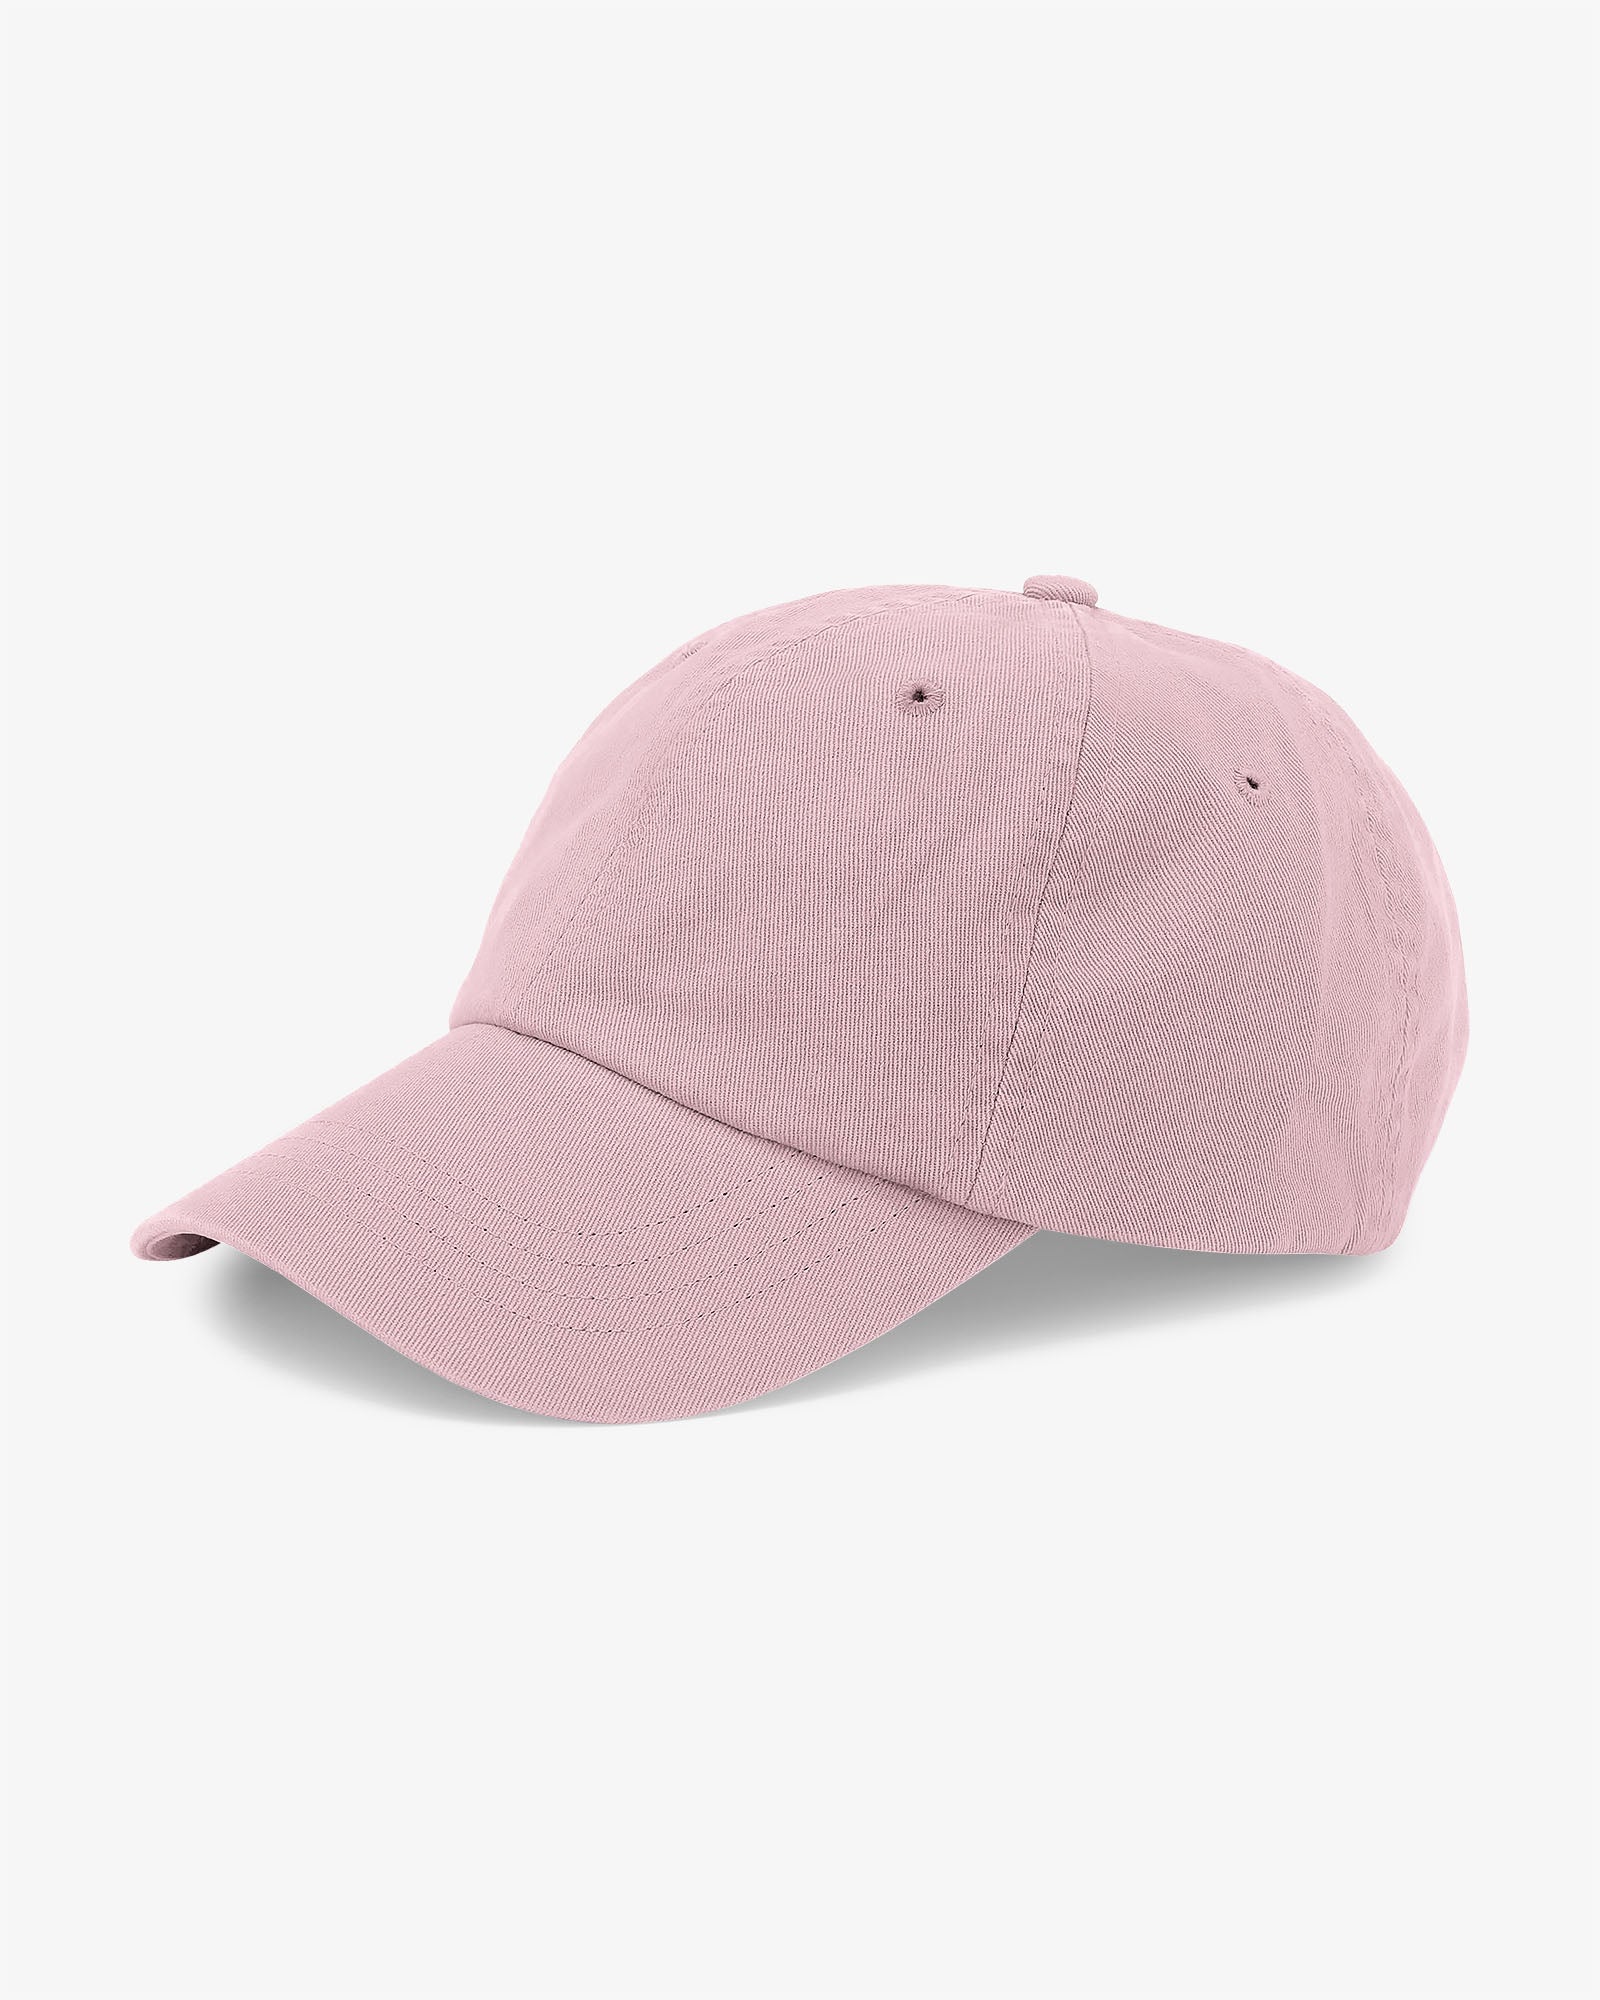 Colorful Standard Faded Pink Organic Cotton Twill Cap